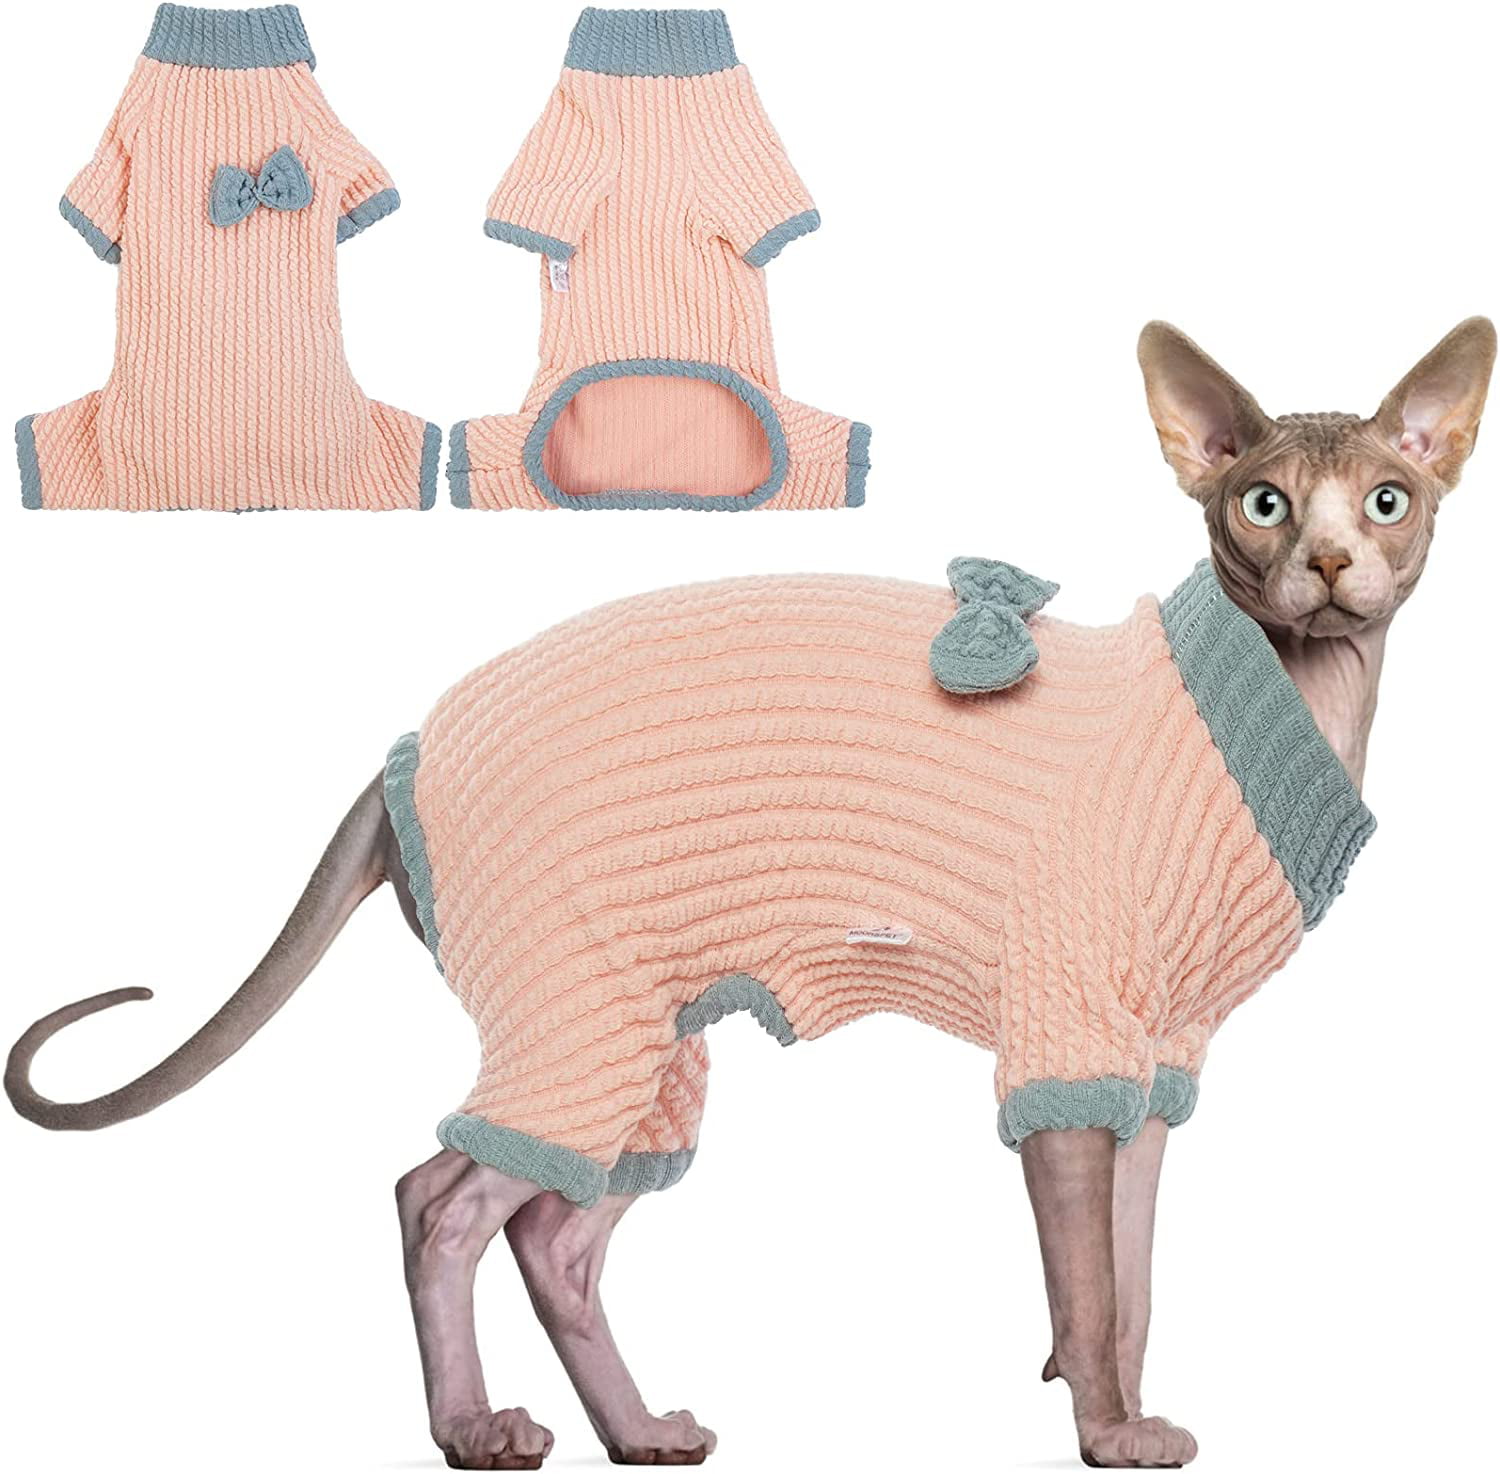 QWZNDZGR Sphynx Hairless Cats Warm Winter Sweater Cute Pullover High  Elasticity Kitten Shirts Breathable Cat Leisure Wear Turtleneck Vest  Adorable Cat's Clothes Jacket Pajamas Jumpsuit 